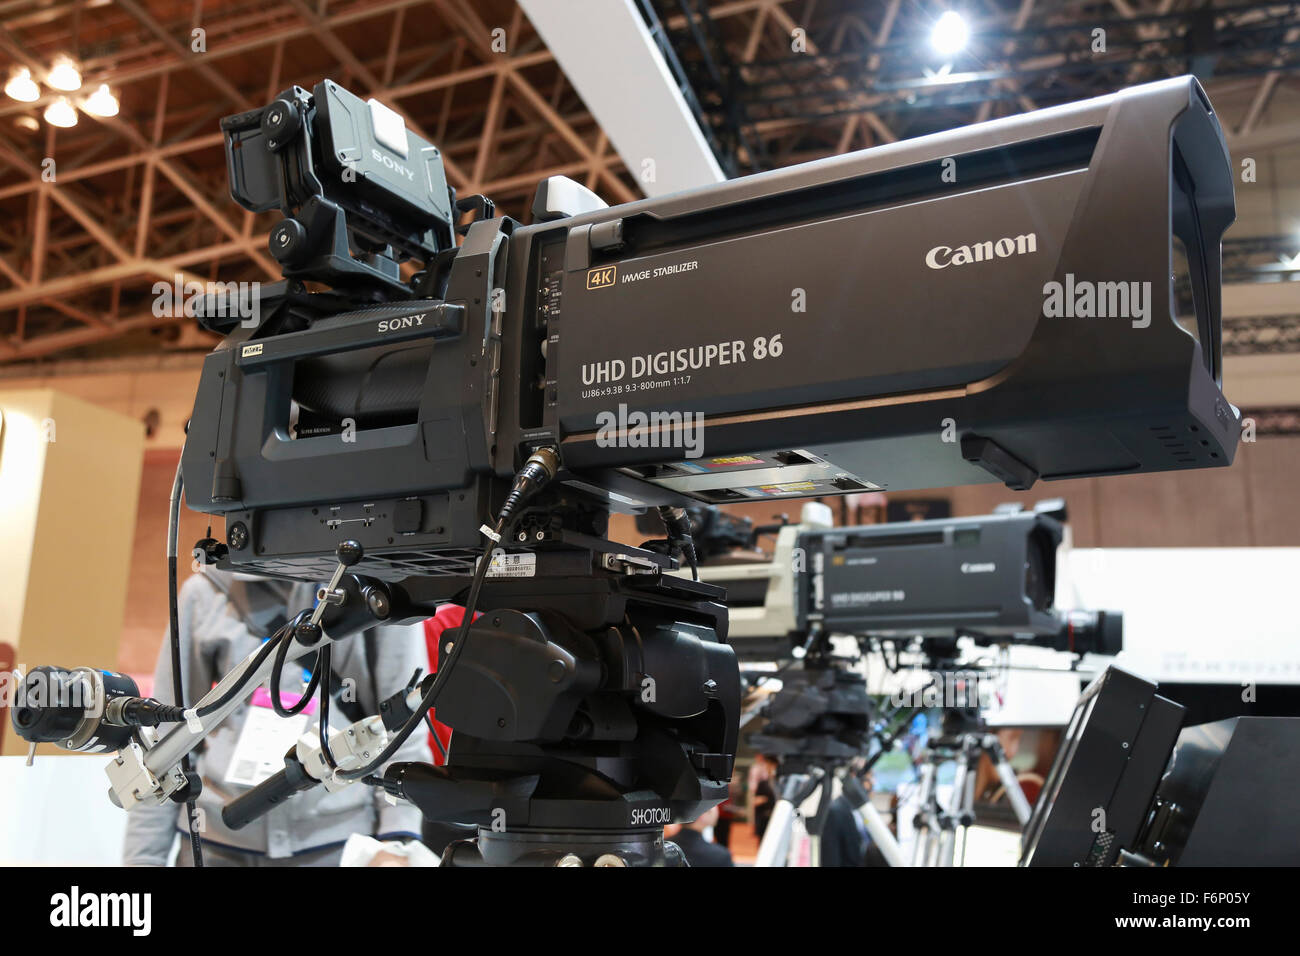 Canon 4K lenses for TV cameras on display during the International  Broadcast Equipment Exhibition (Inter BEE) in Makuhari Messe on November  18, 2015, Chiba, Japan. The exhibition shows the latest visual media